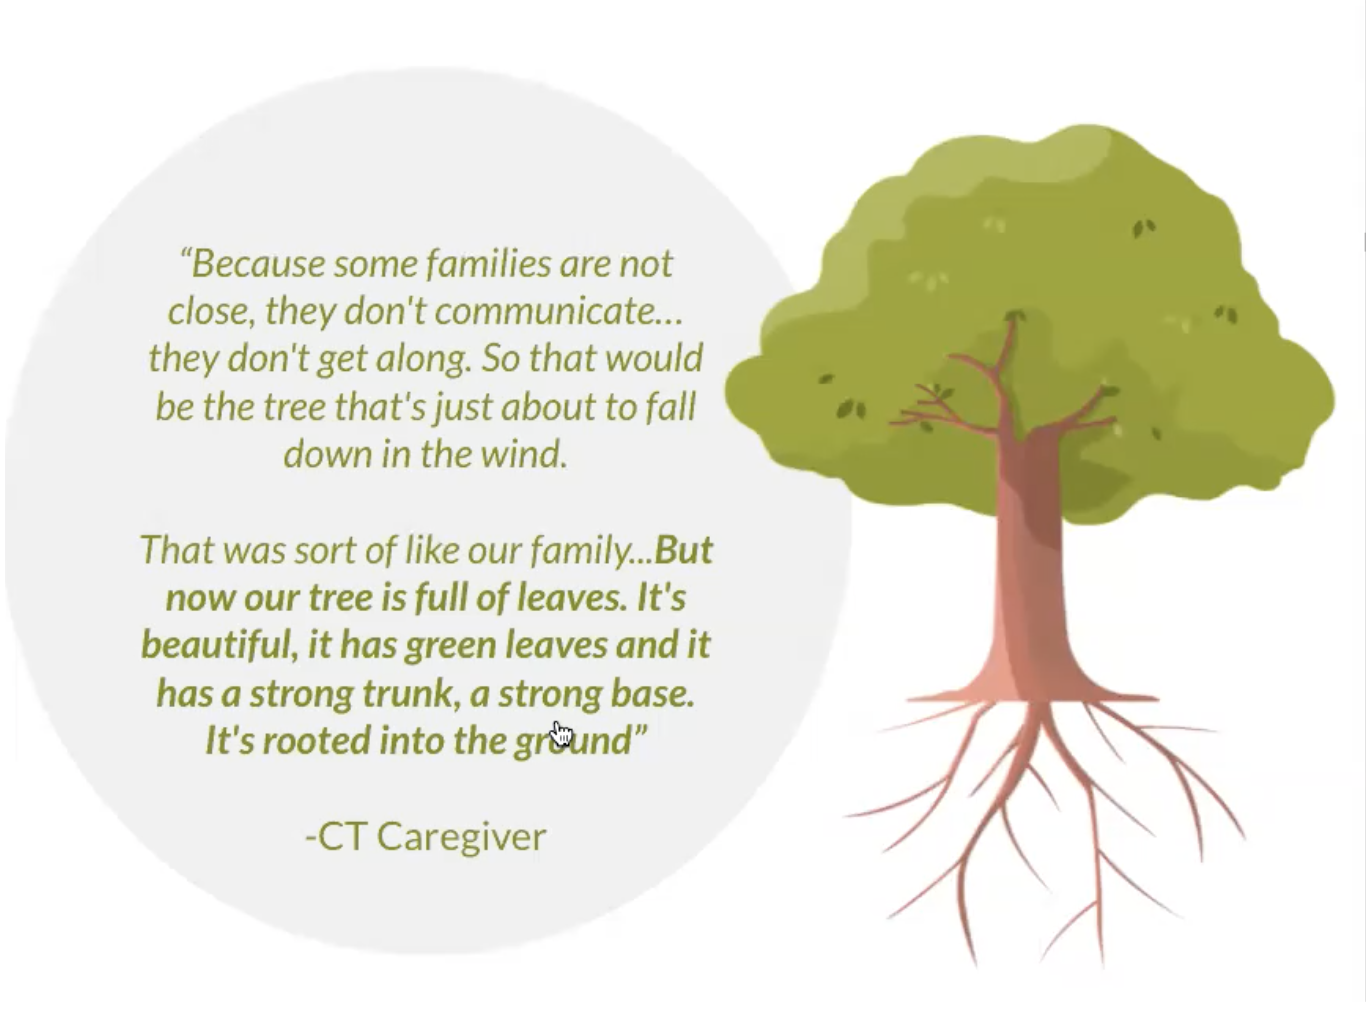 Coping Together uses a tree as a metaphor of a strong family relationship